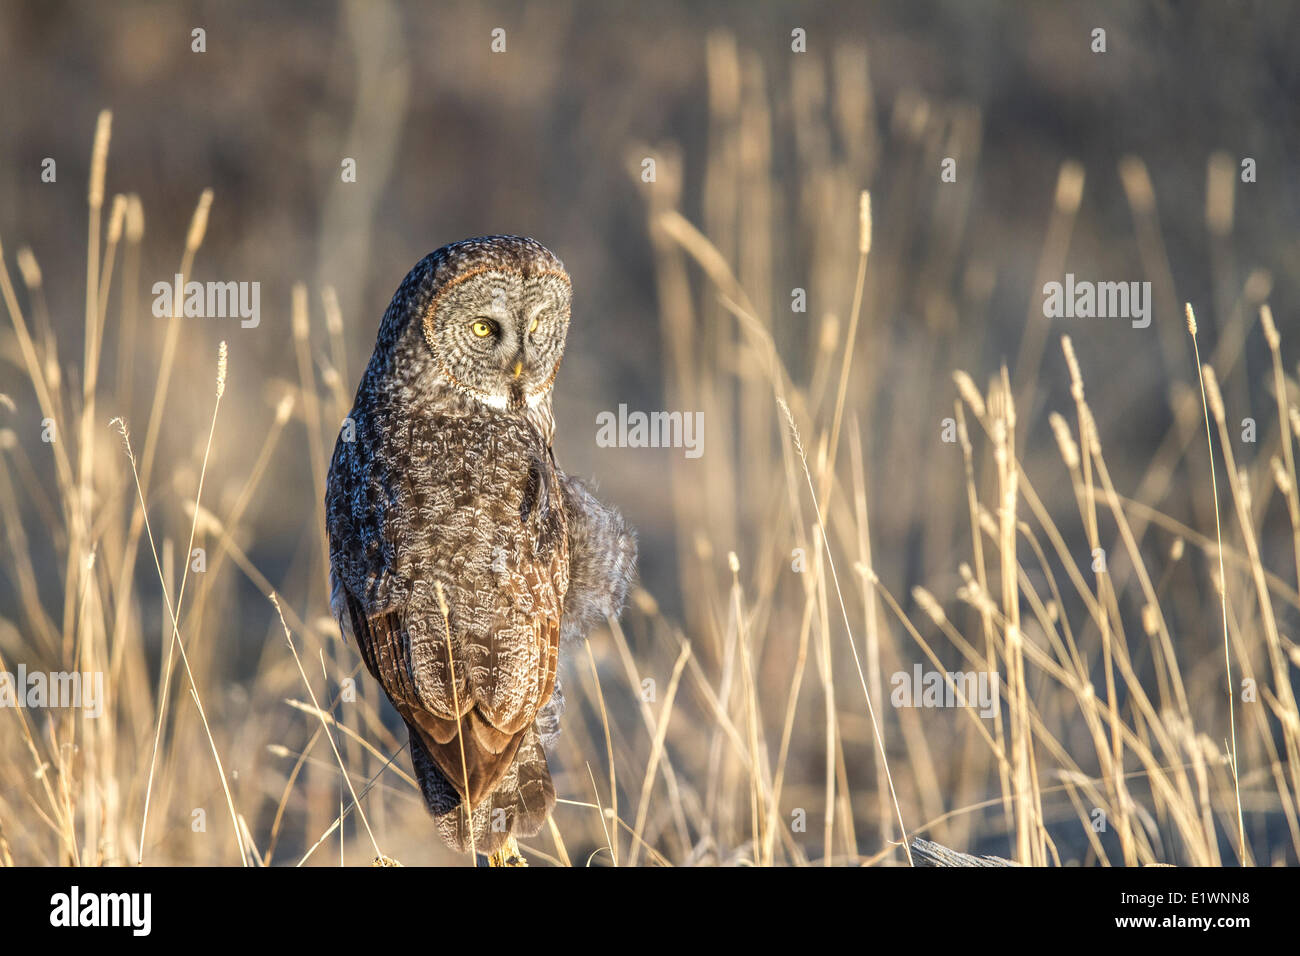 Great Grey Owl (Strix nebulosa) Eye level shot sitting on tree stump in the early morning as Owl looks aroud for food. Grand Stock Photo